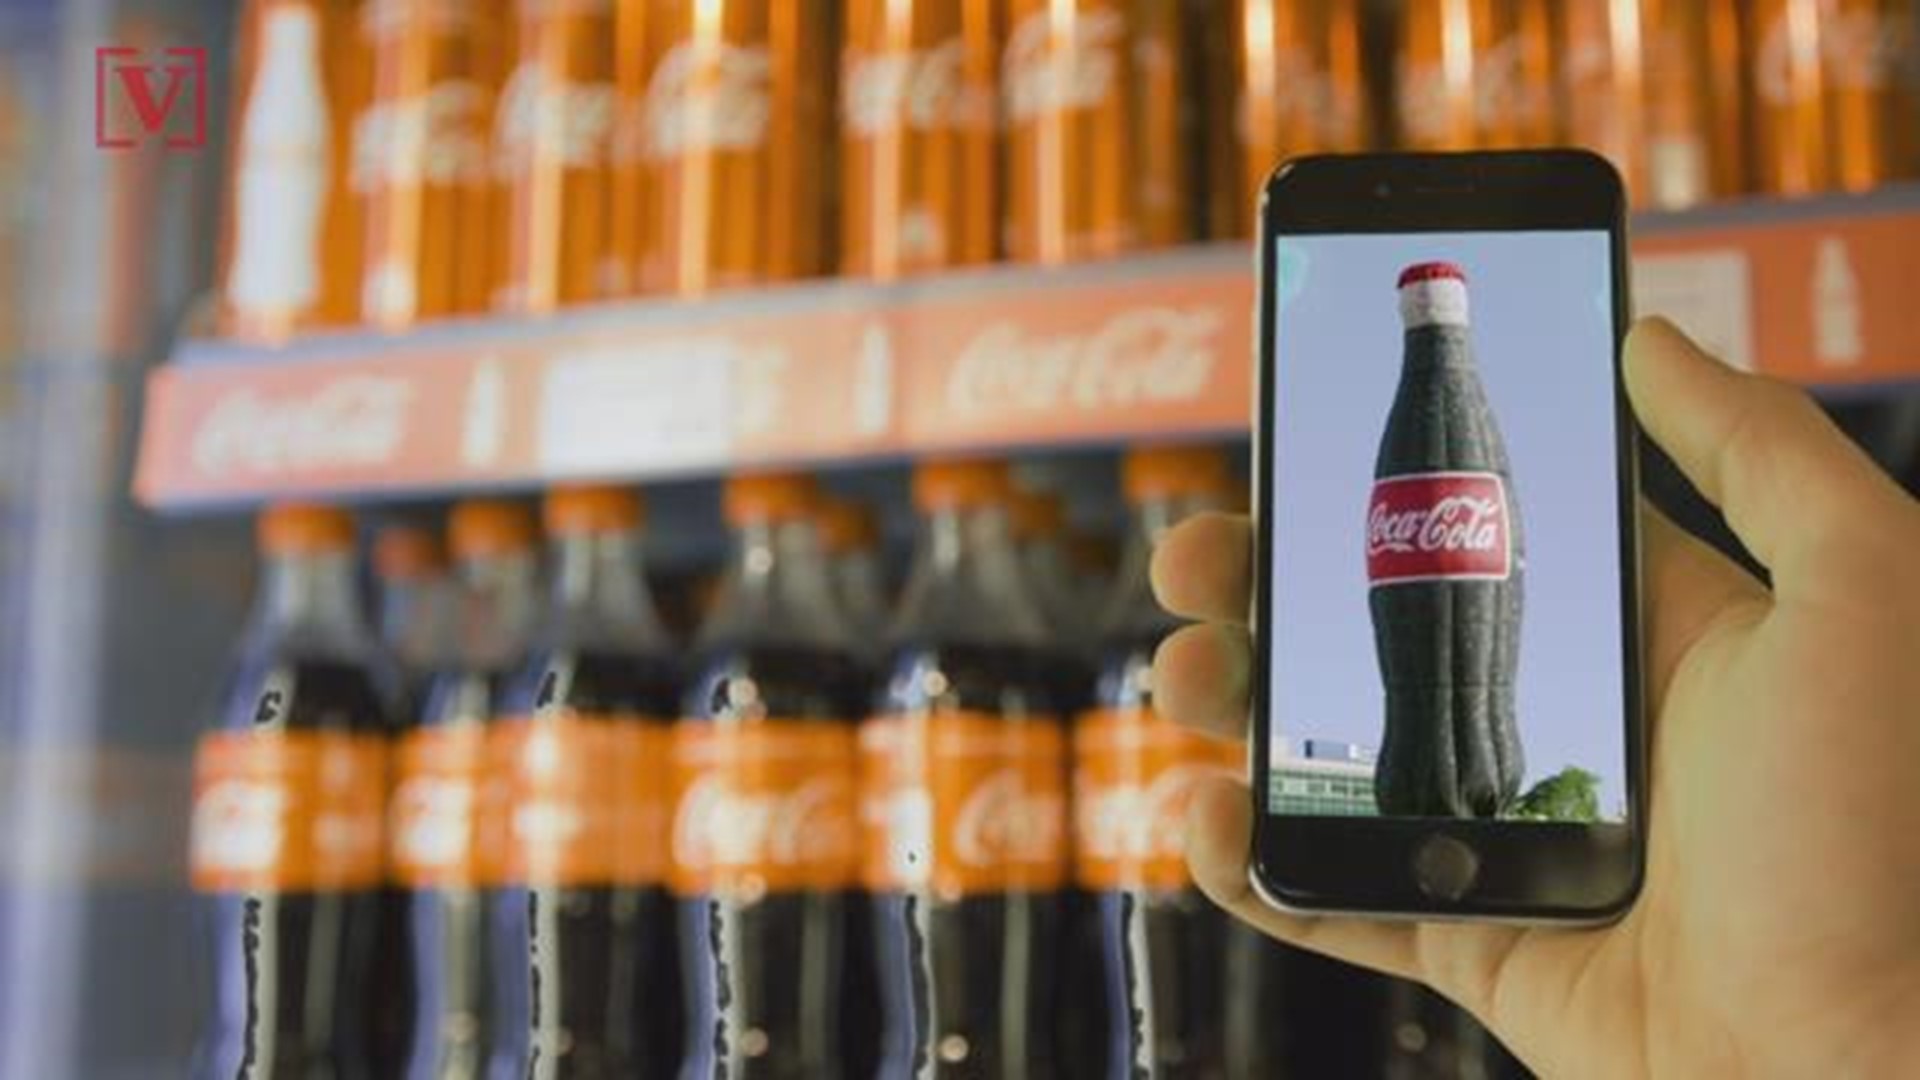 Coca-Cola may be the next industry giant to enter the cannabis industry by making cannabis-infused drinks BNN Bloomberg reports. Veuer Natasha Abellard has the story.